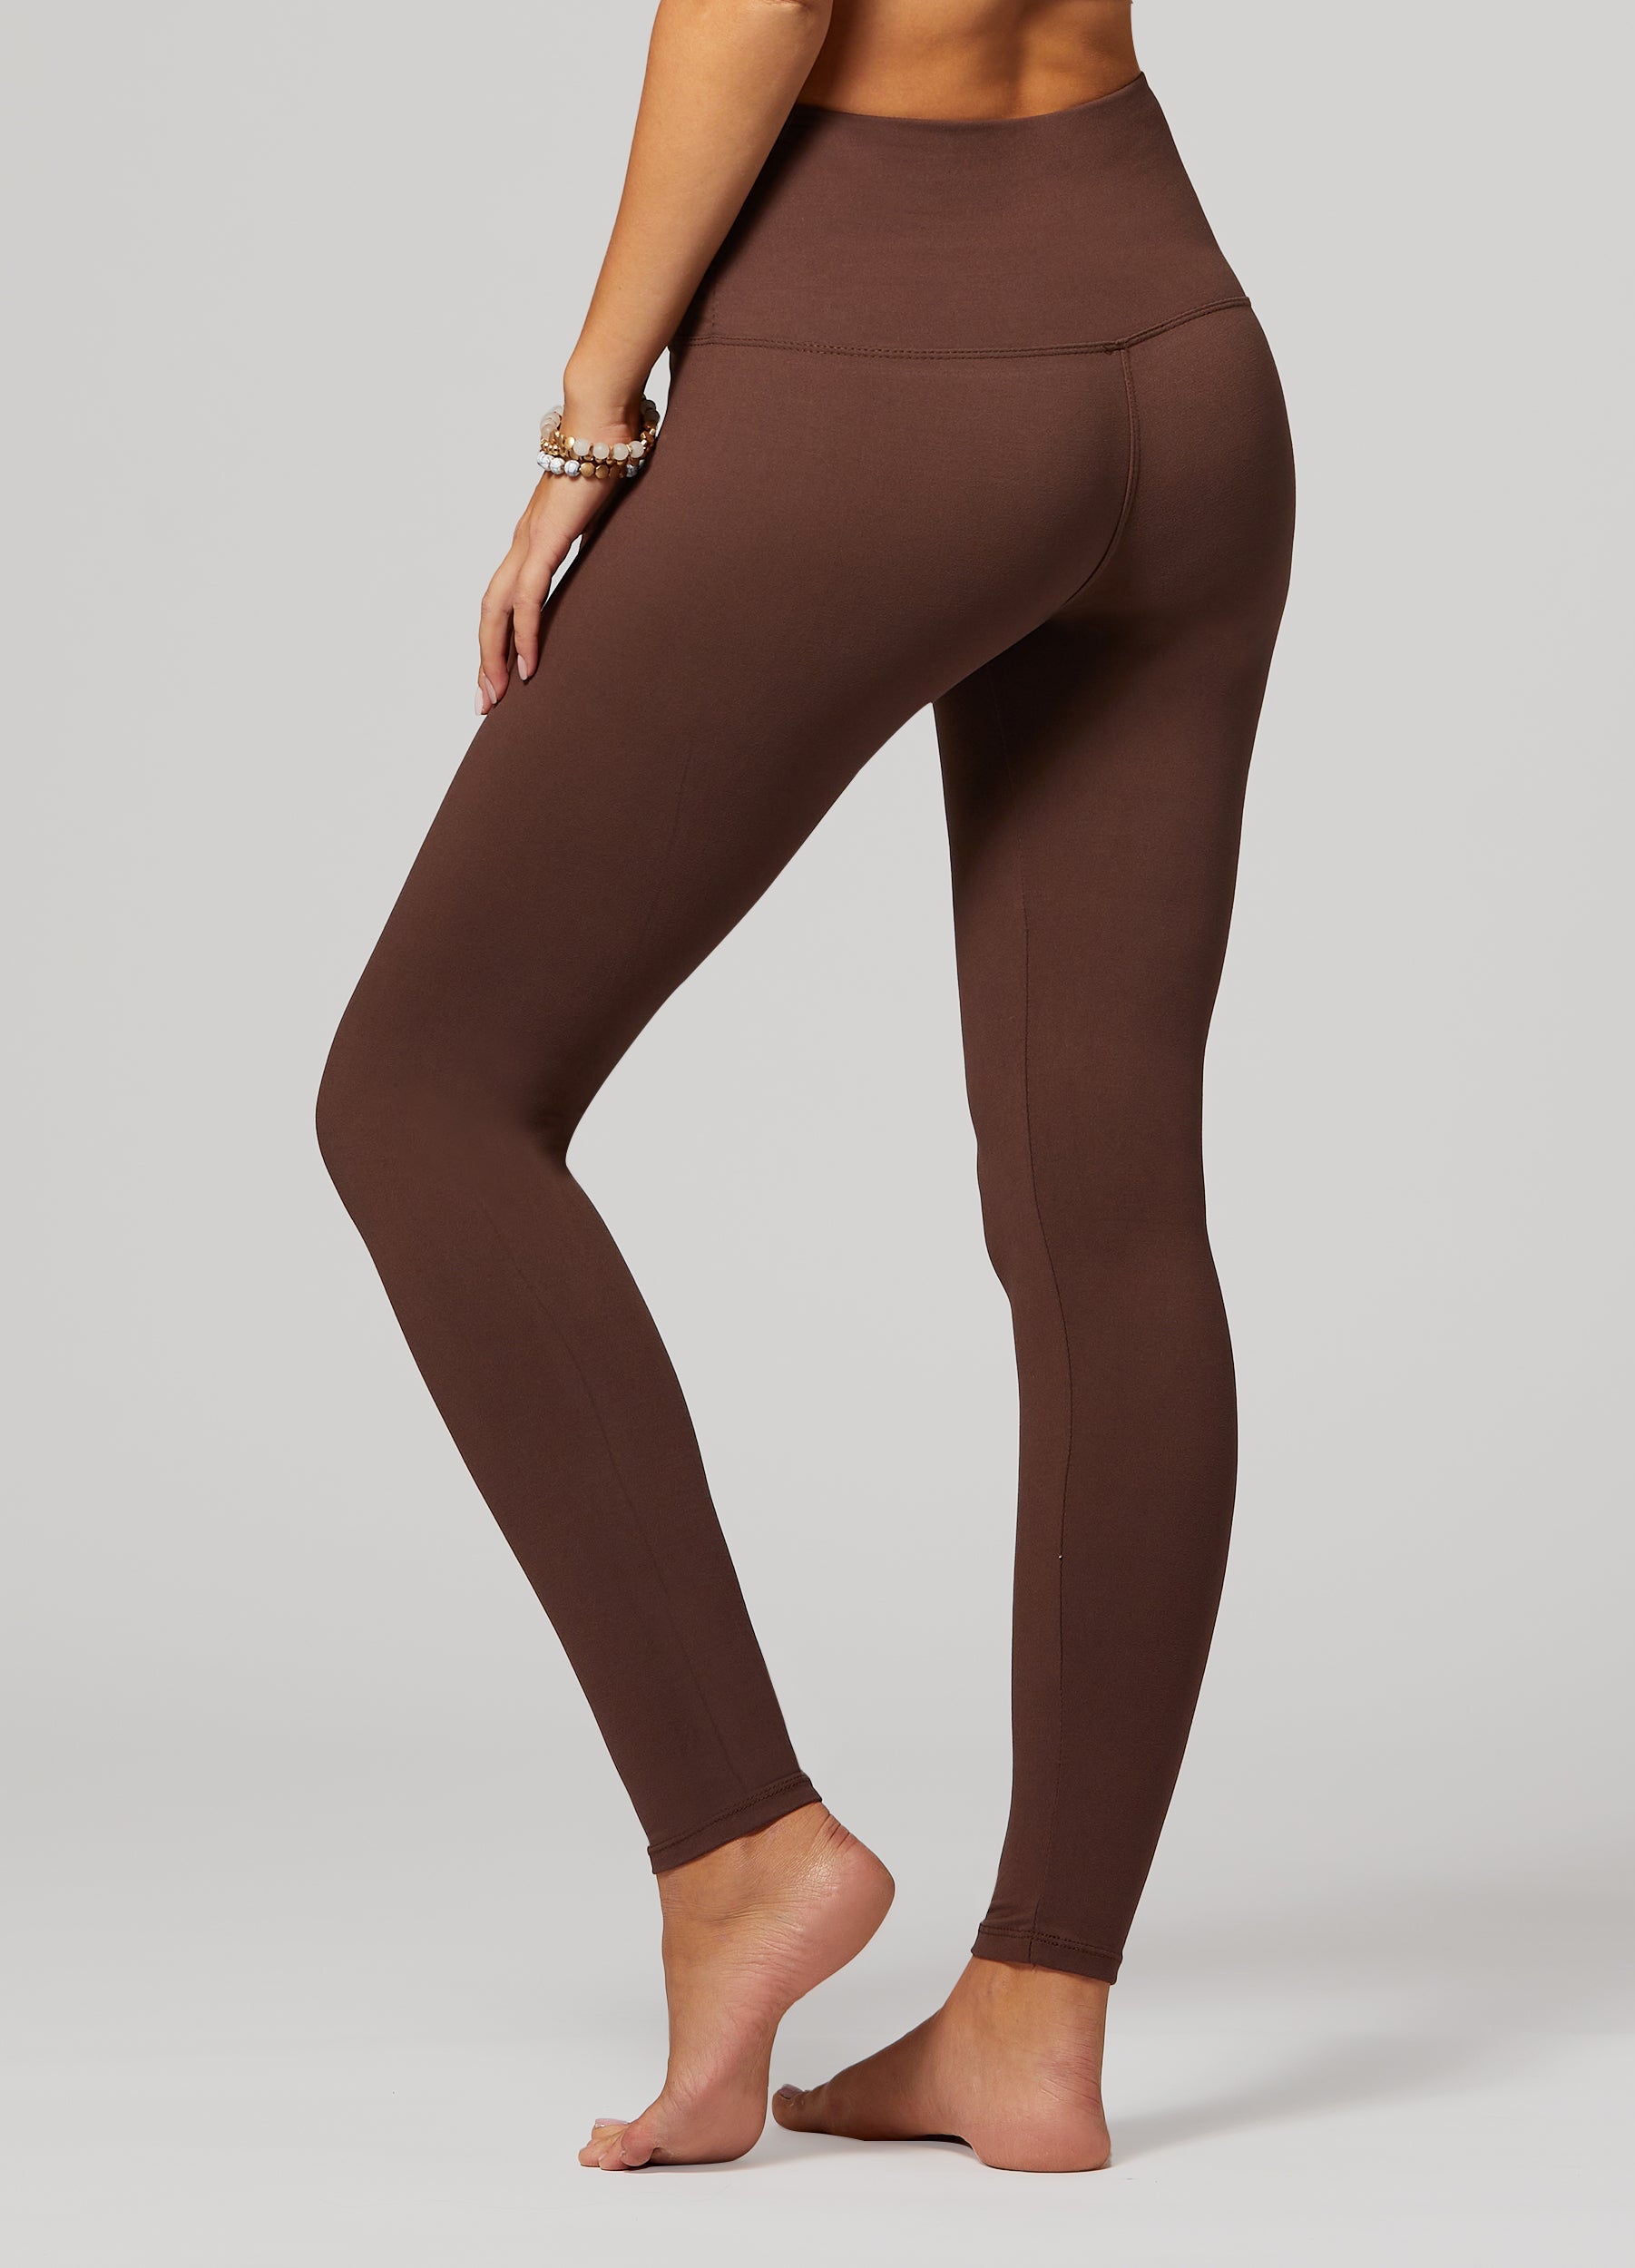 Women's Everyday Soft Ultra High-Rise Flare Leggings - All in Motion Brown  XS 1 ct